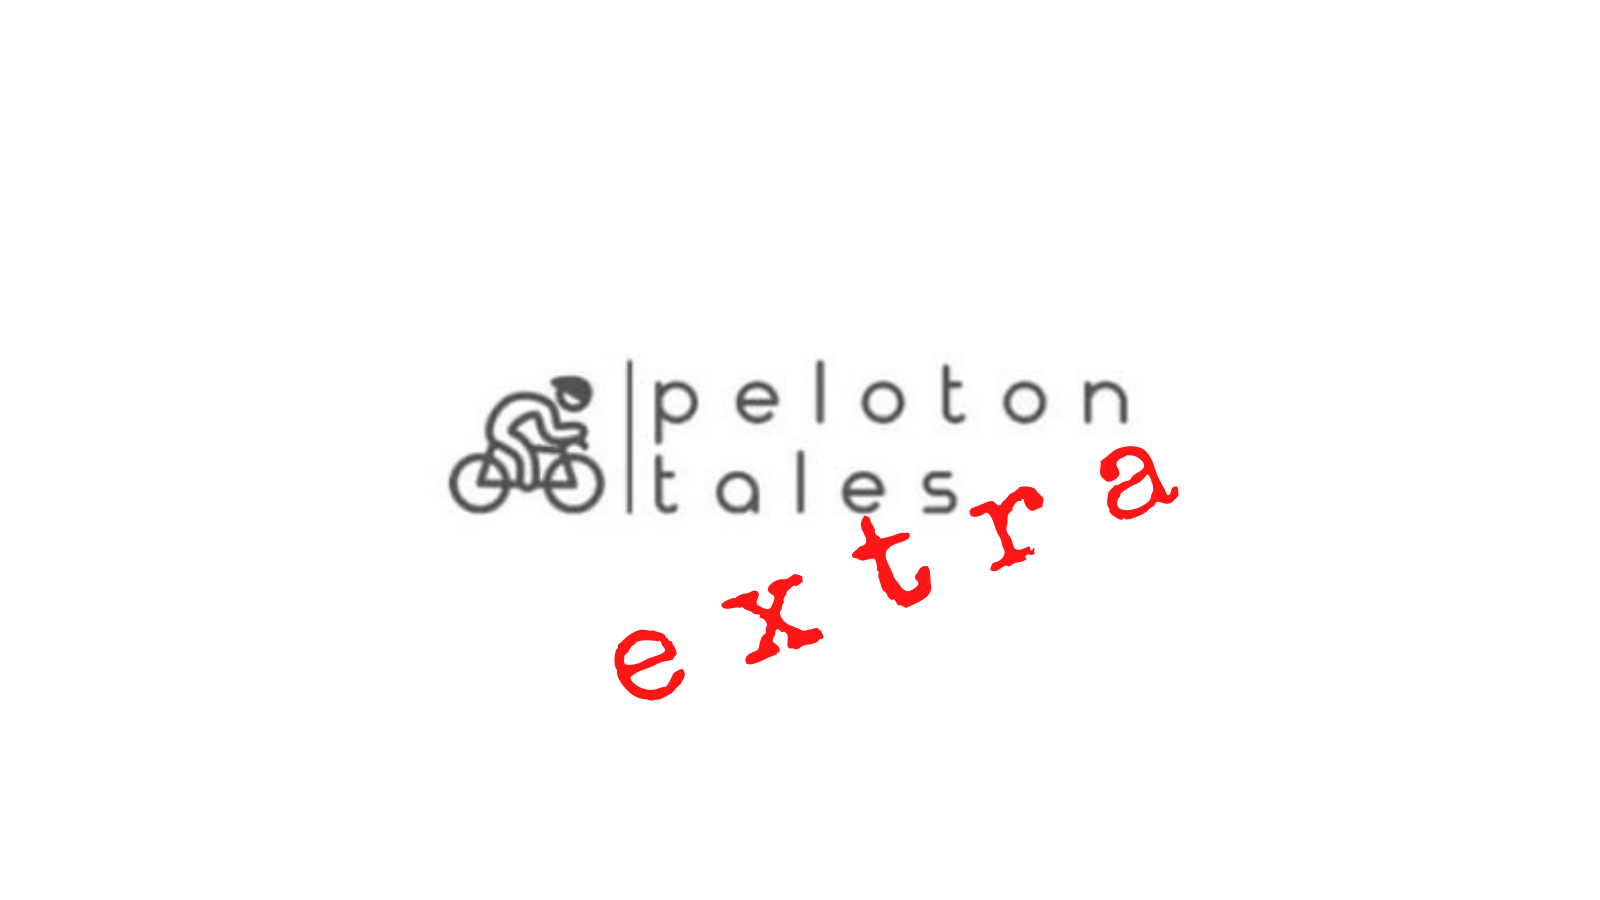 Read more exclusive content on Peloton&Tales The blog about great cycling stories.